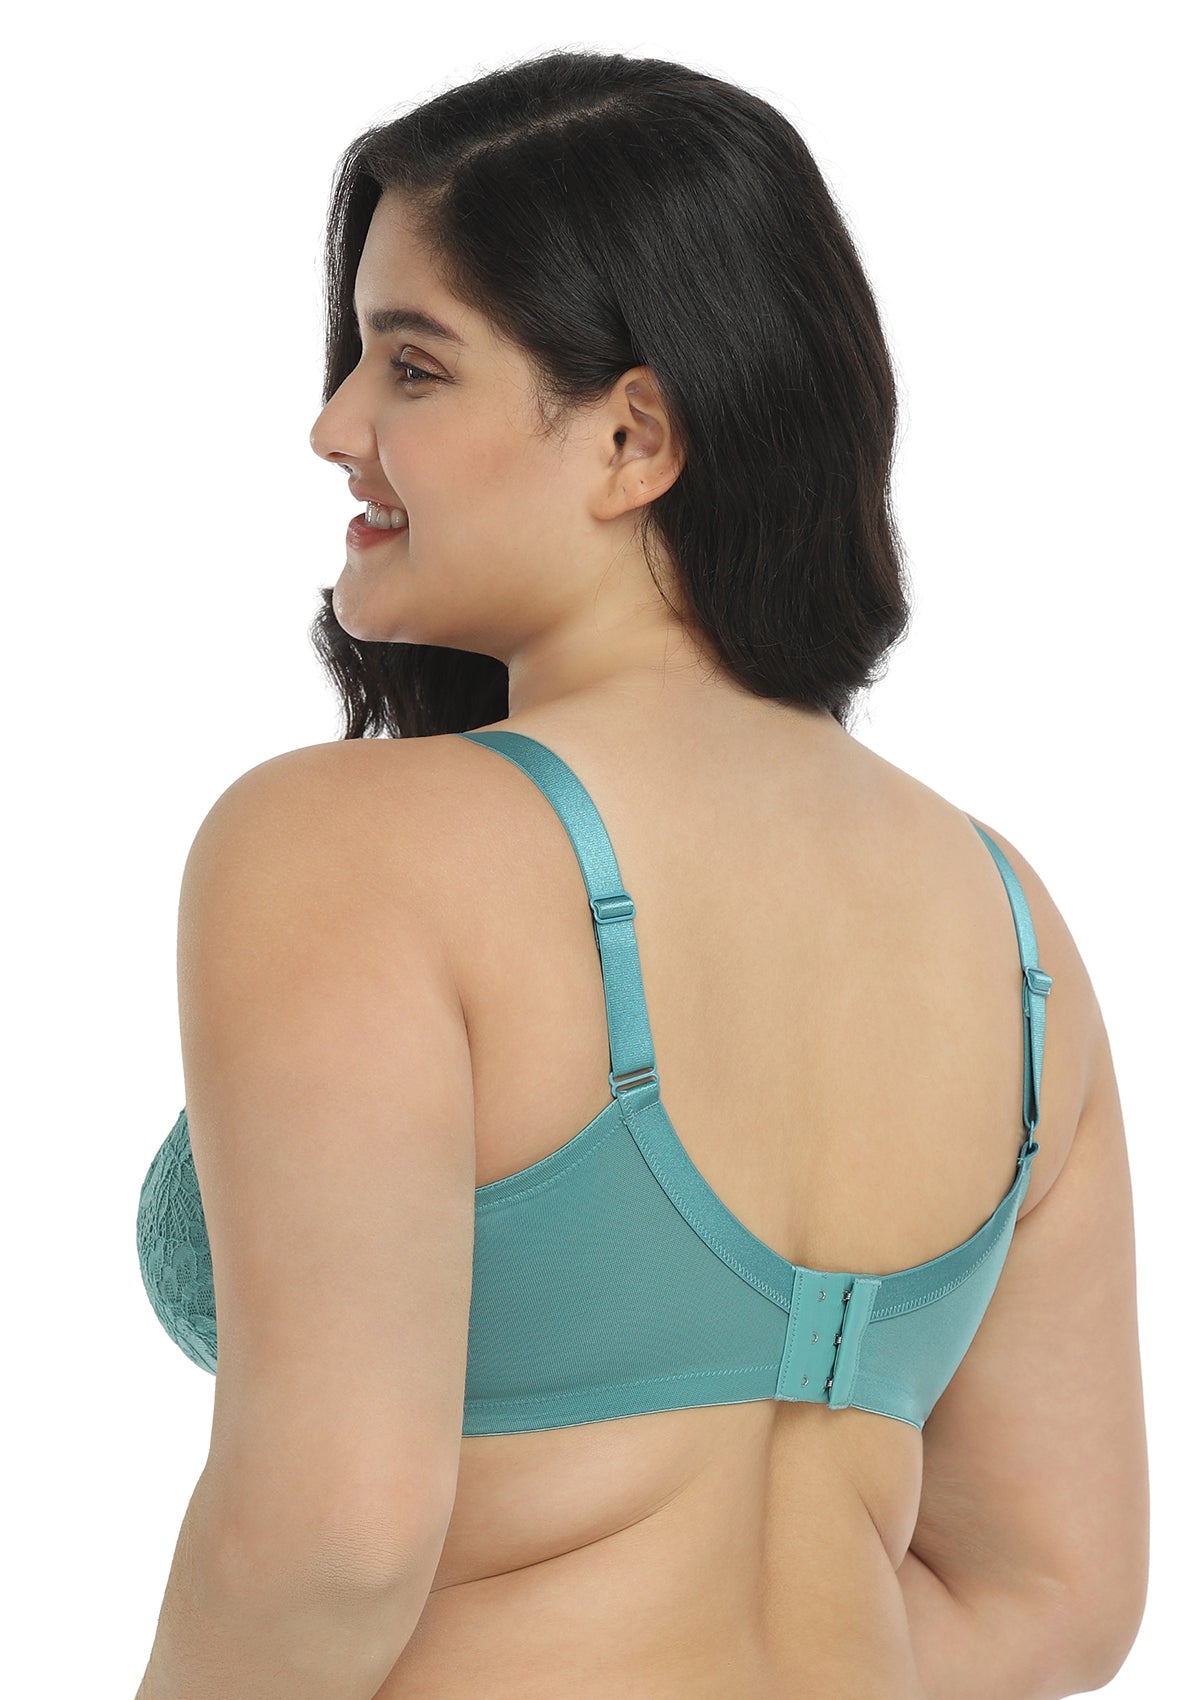 HSIA Paeonia Lace Full Coverage Underwire Non-Padded Uplifting Bra - Teal / 40 / D